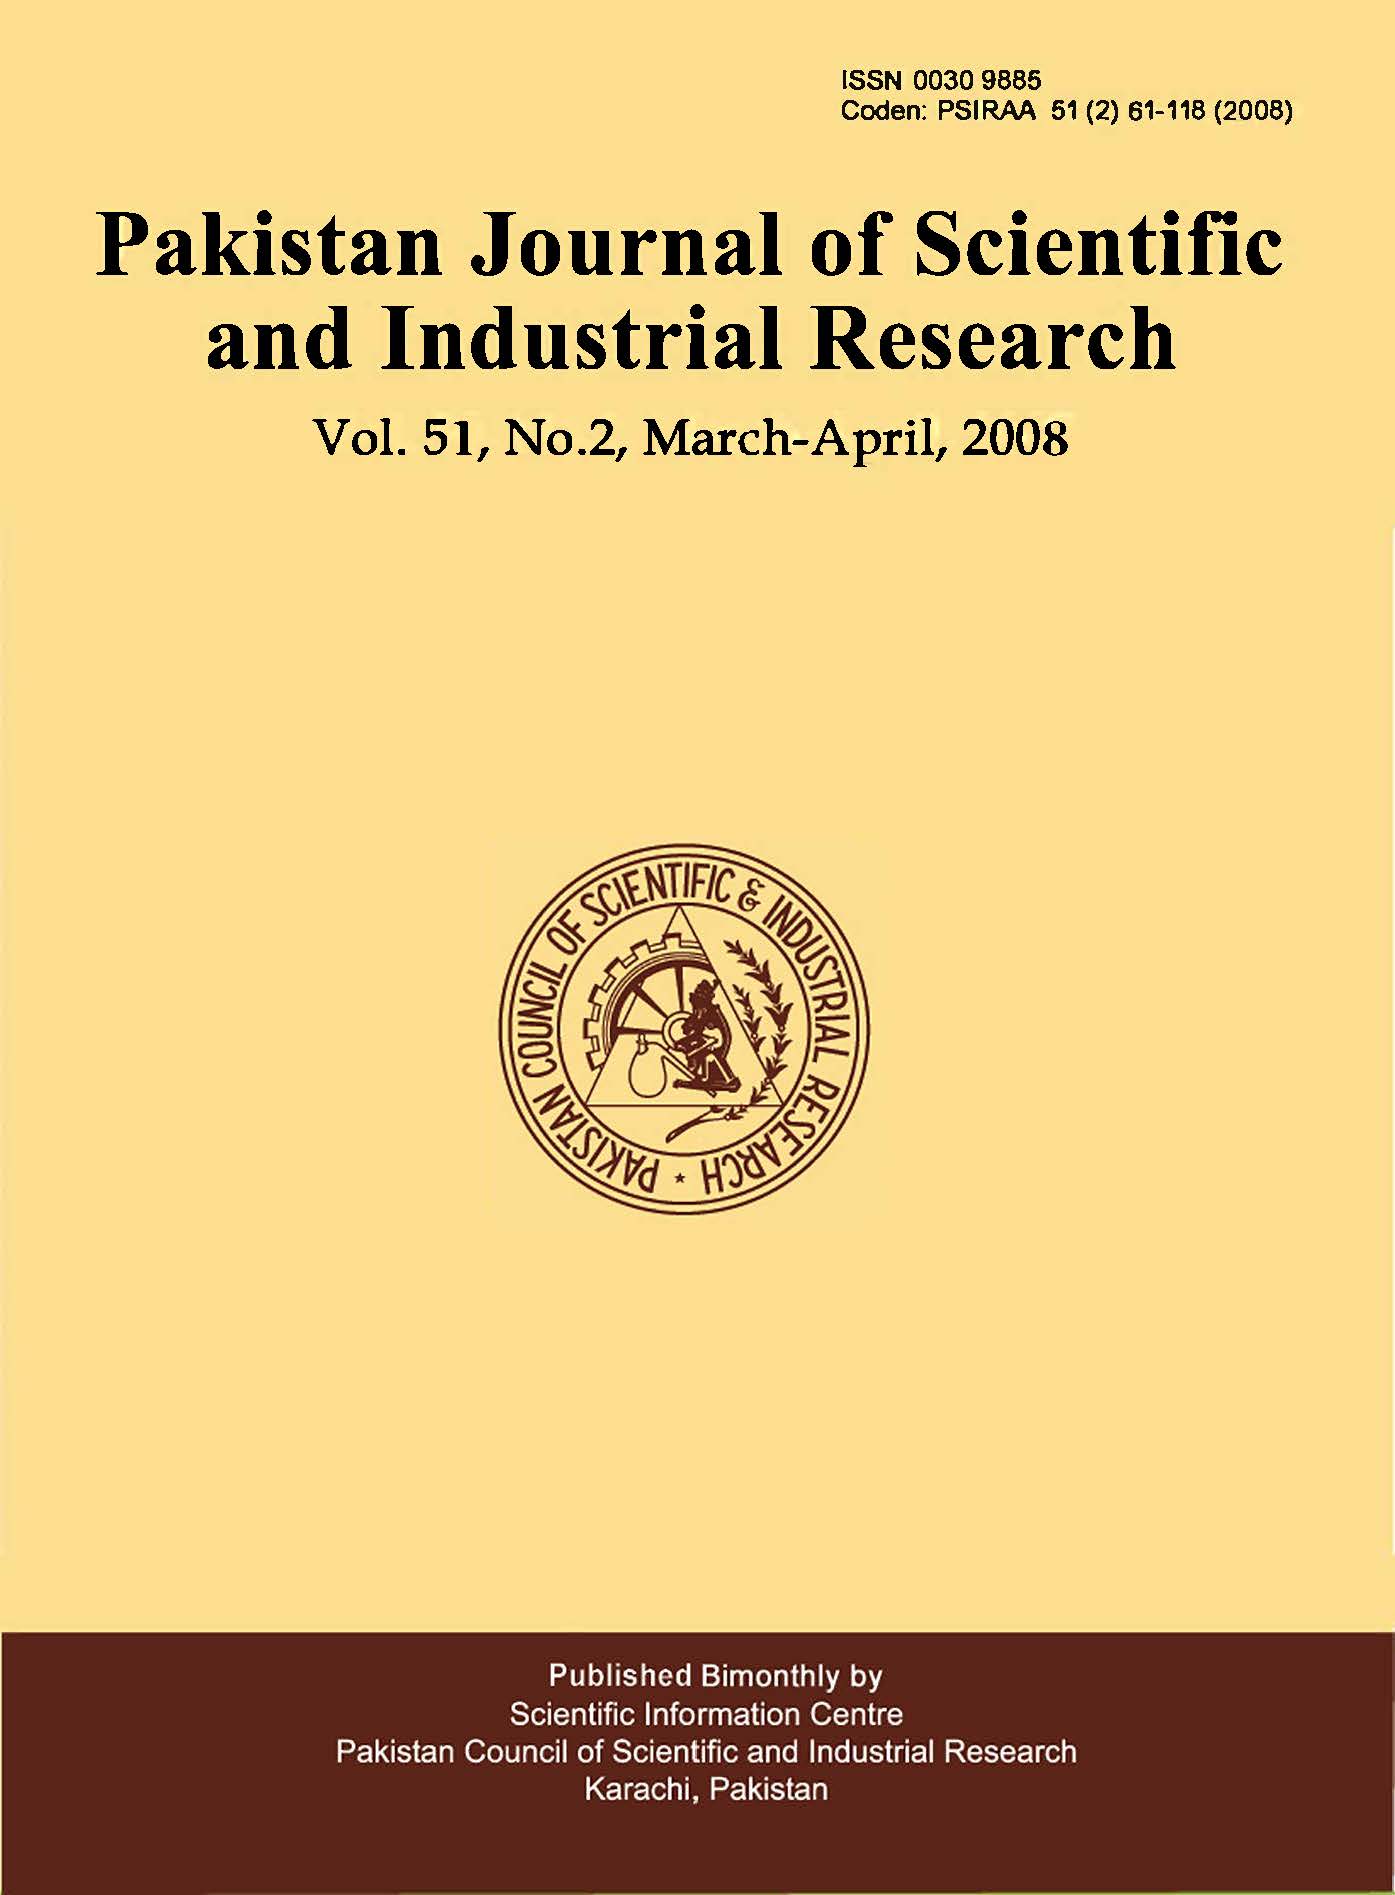 					View Vol. 51 No. 2 (2008): Pakistan Journal of Scientific and Industrial Research
				